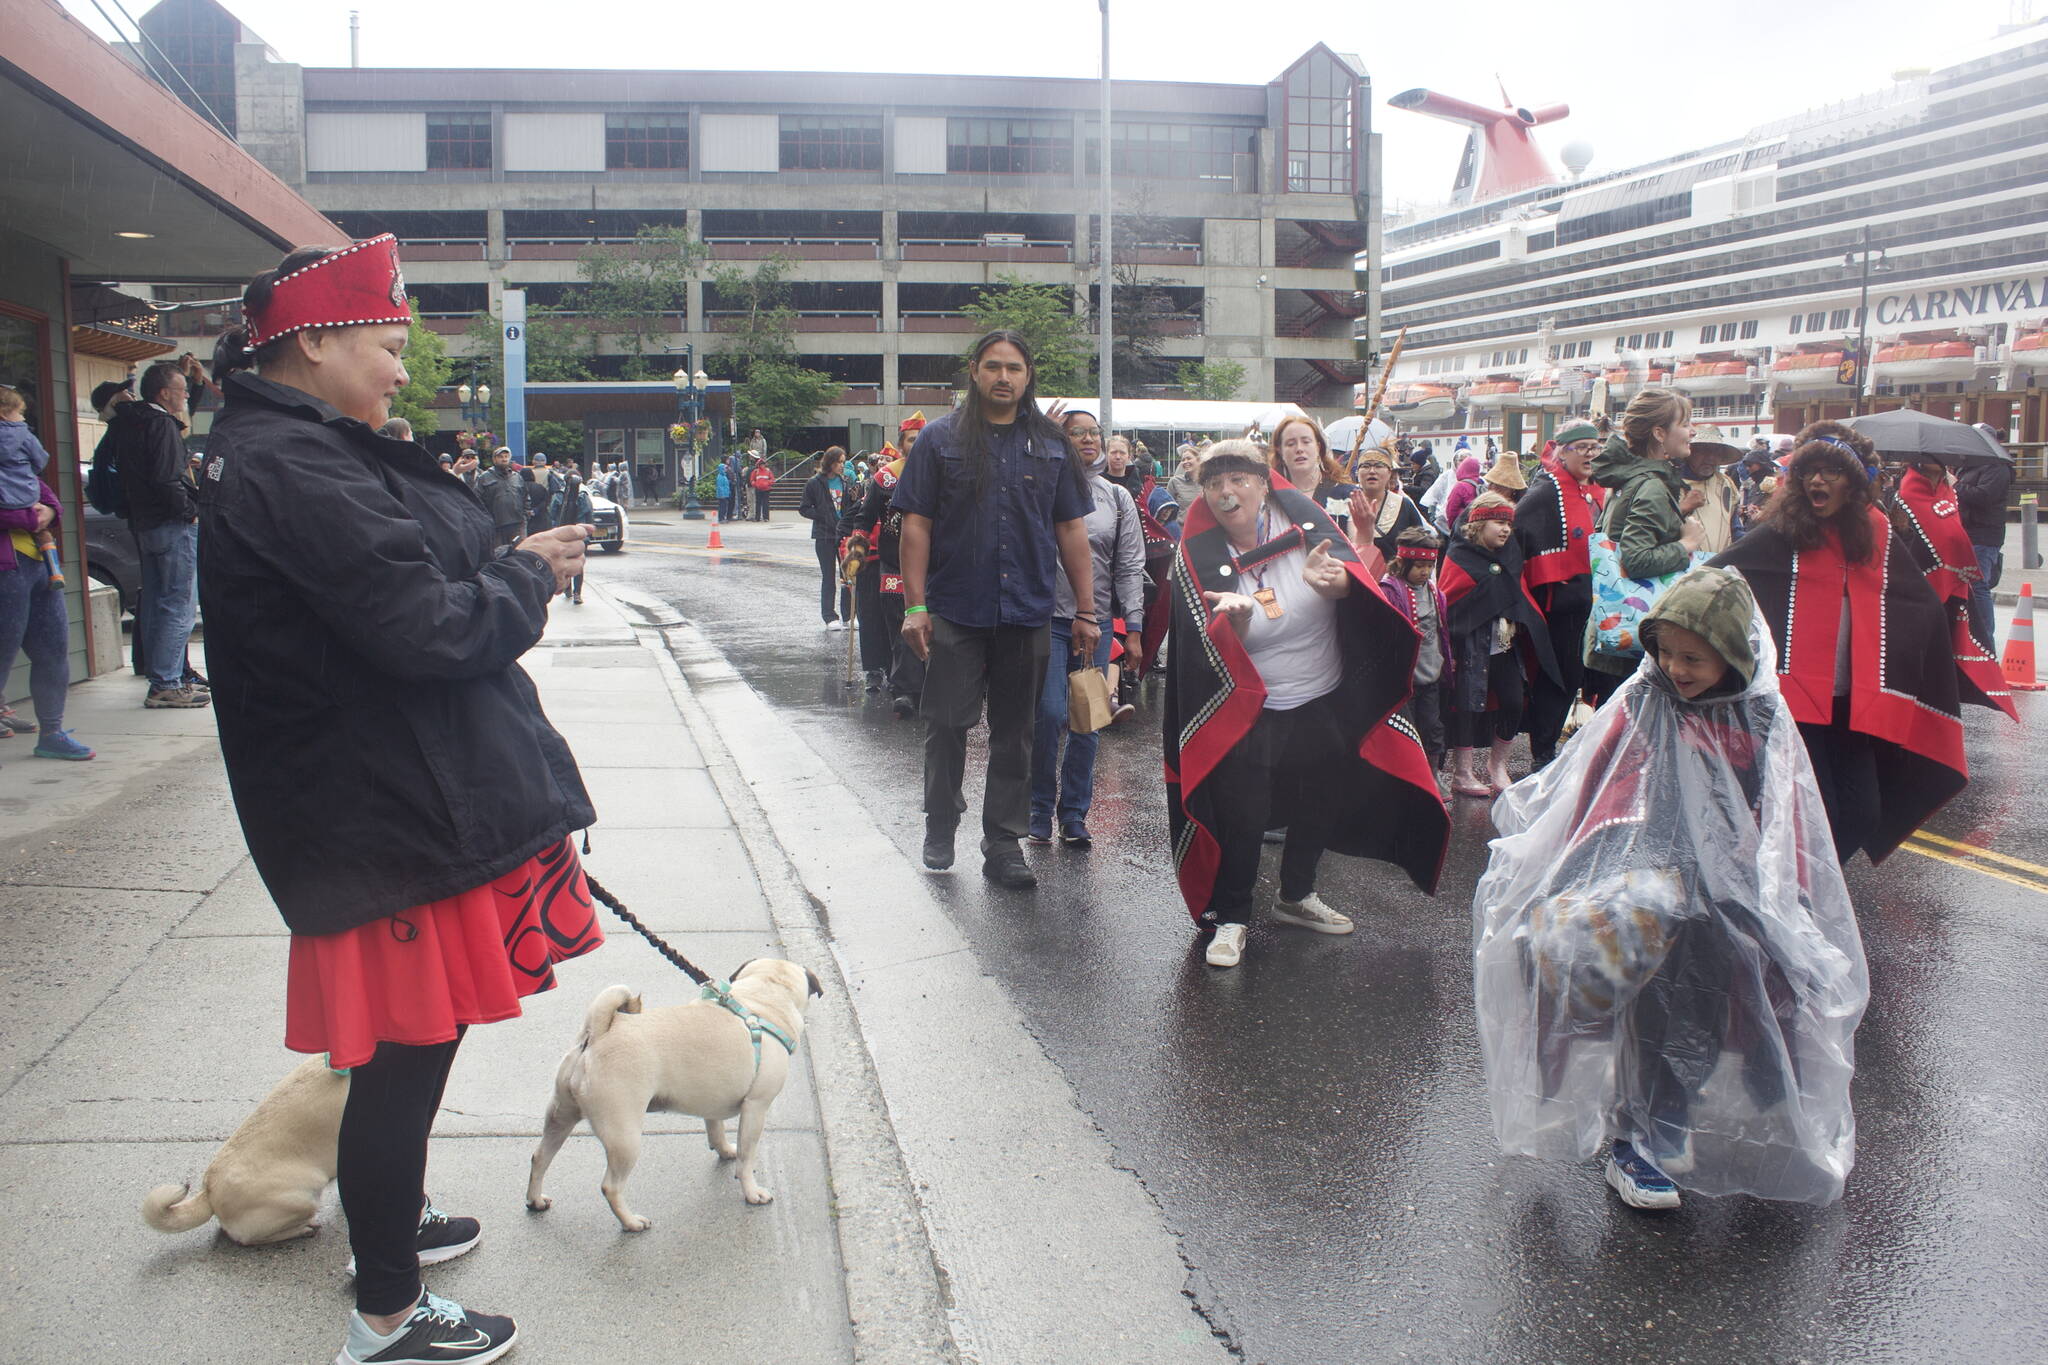 Mary Snook, a Ketchikan resident of Tlingit, Haida and Tsimshian ancestry, takes a photo of her fellow Alaska Natives passing by during the Celebration parade in downtown Juneau on Saturday morning. Snook said she usually participates in the parade when visiting for the landmark biennial gathering, but too many members of her community’s dance group were unable to make it this year due to reasons related to the COVID-19 pandemic. (Mark Sabbatini / Juneau Empire).